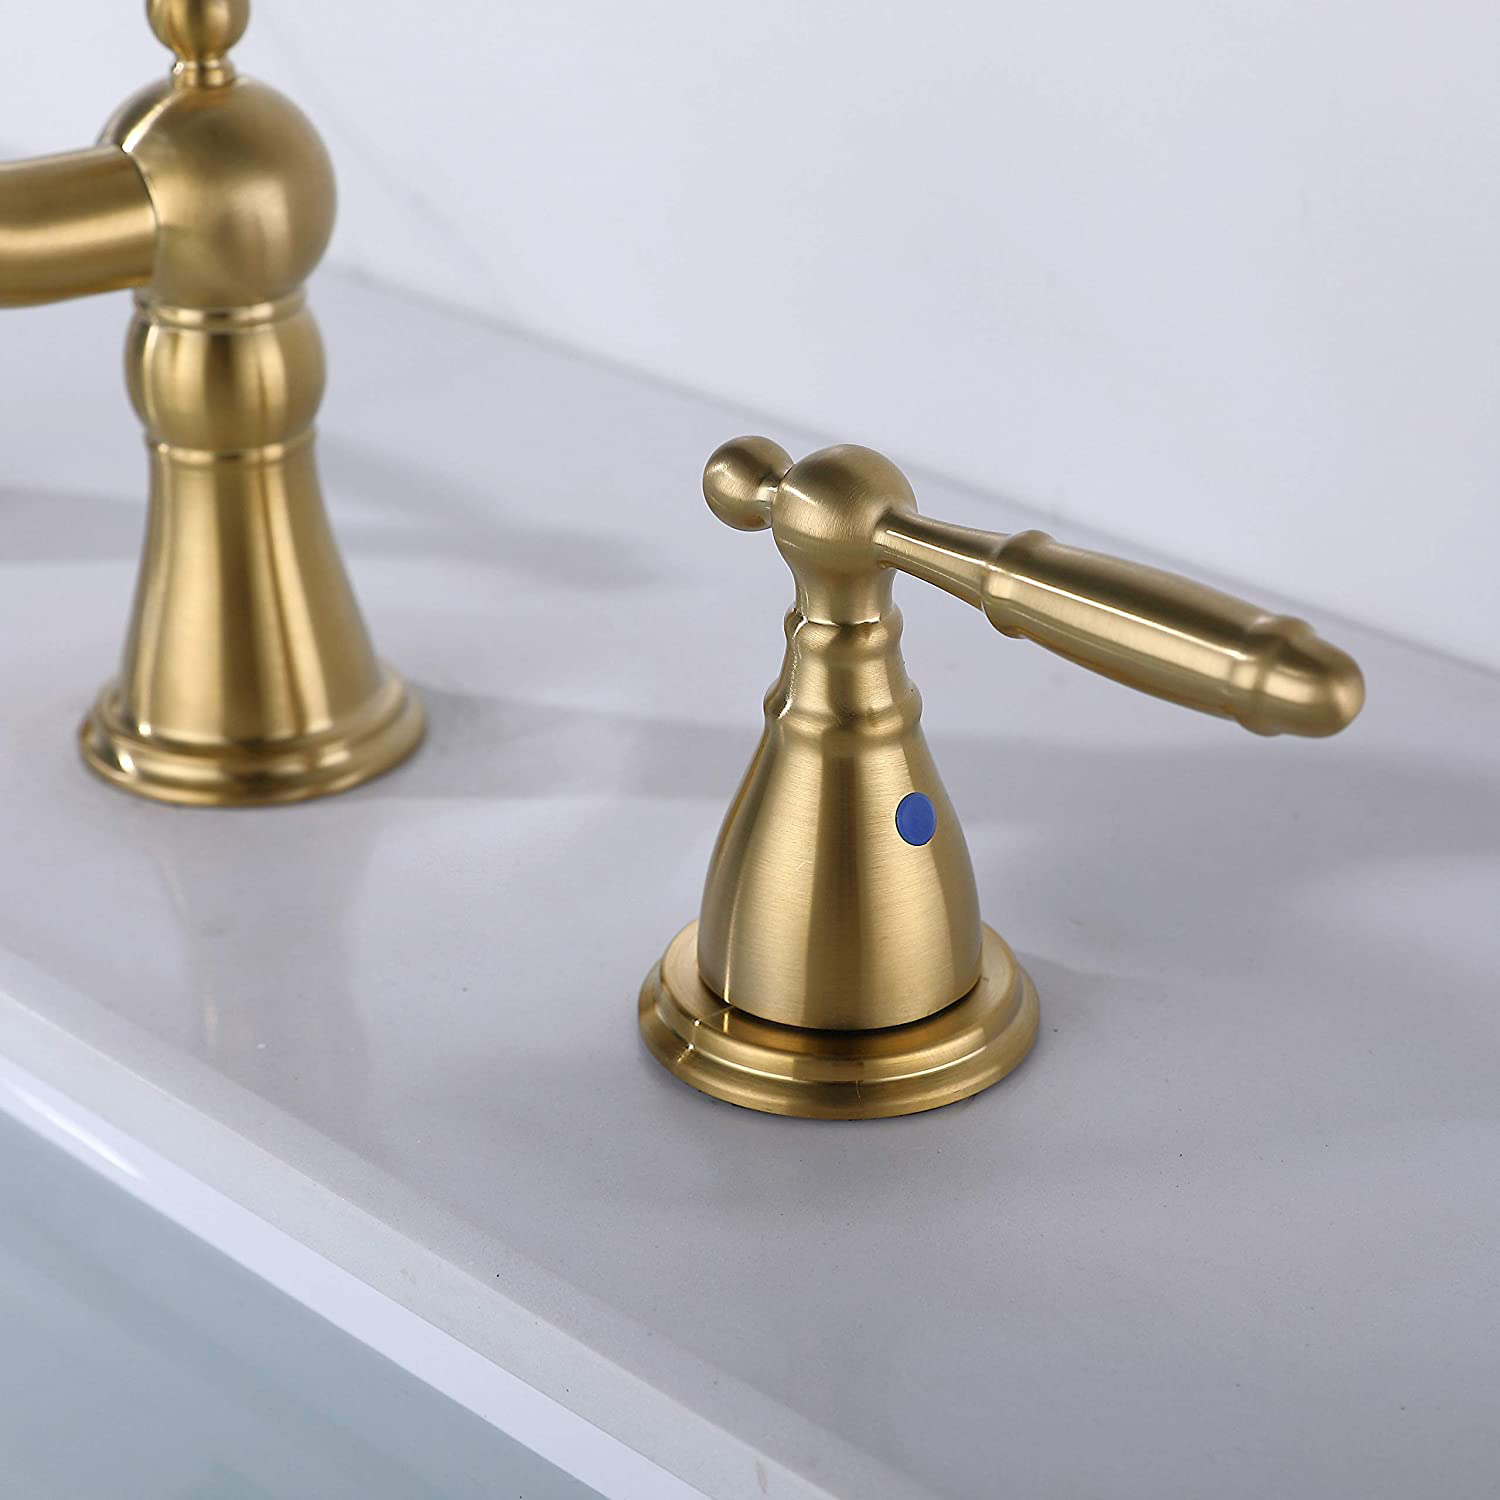 Aquacubic Modern Bathroom Sink Faucet 3 Holes 8 Inch Widespread Brushed Gold Assembly Basin Faucet Tap